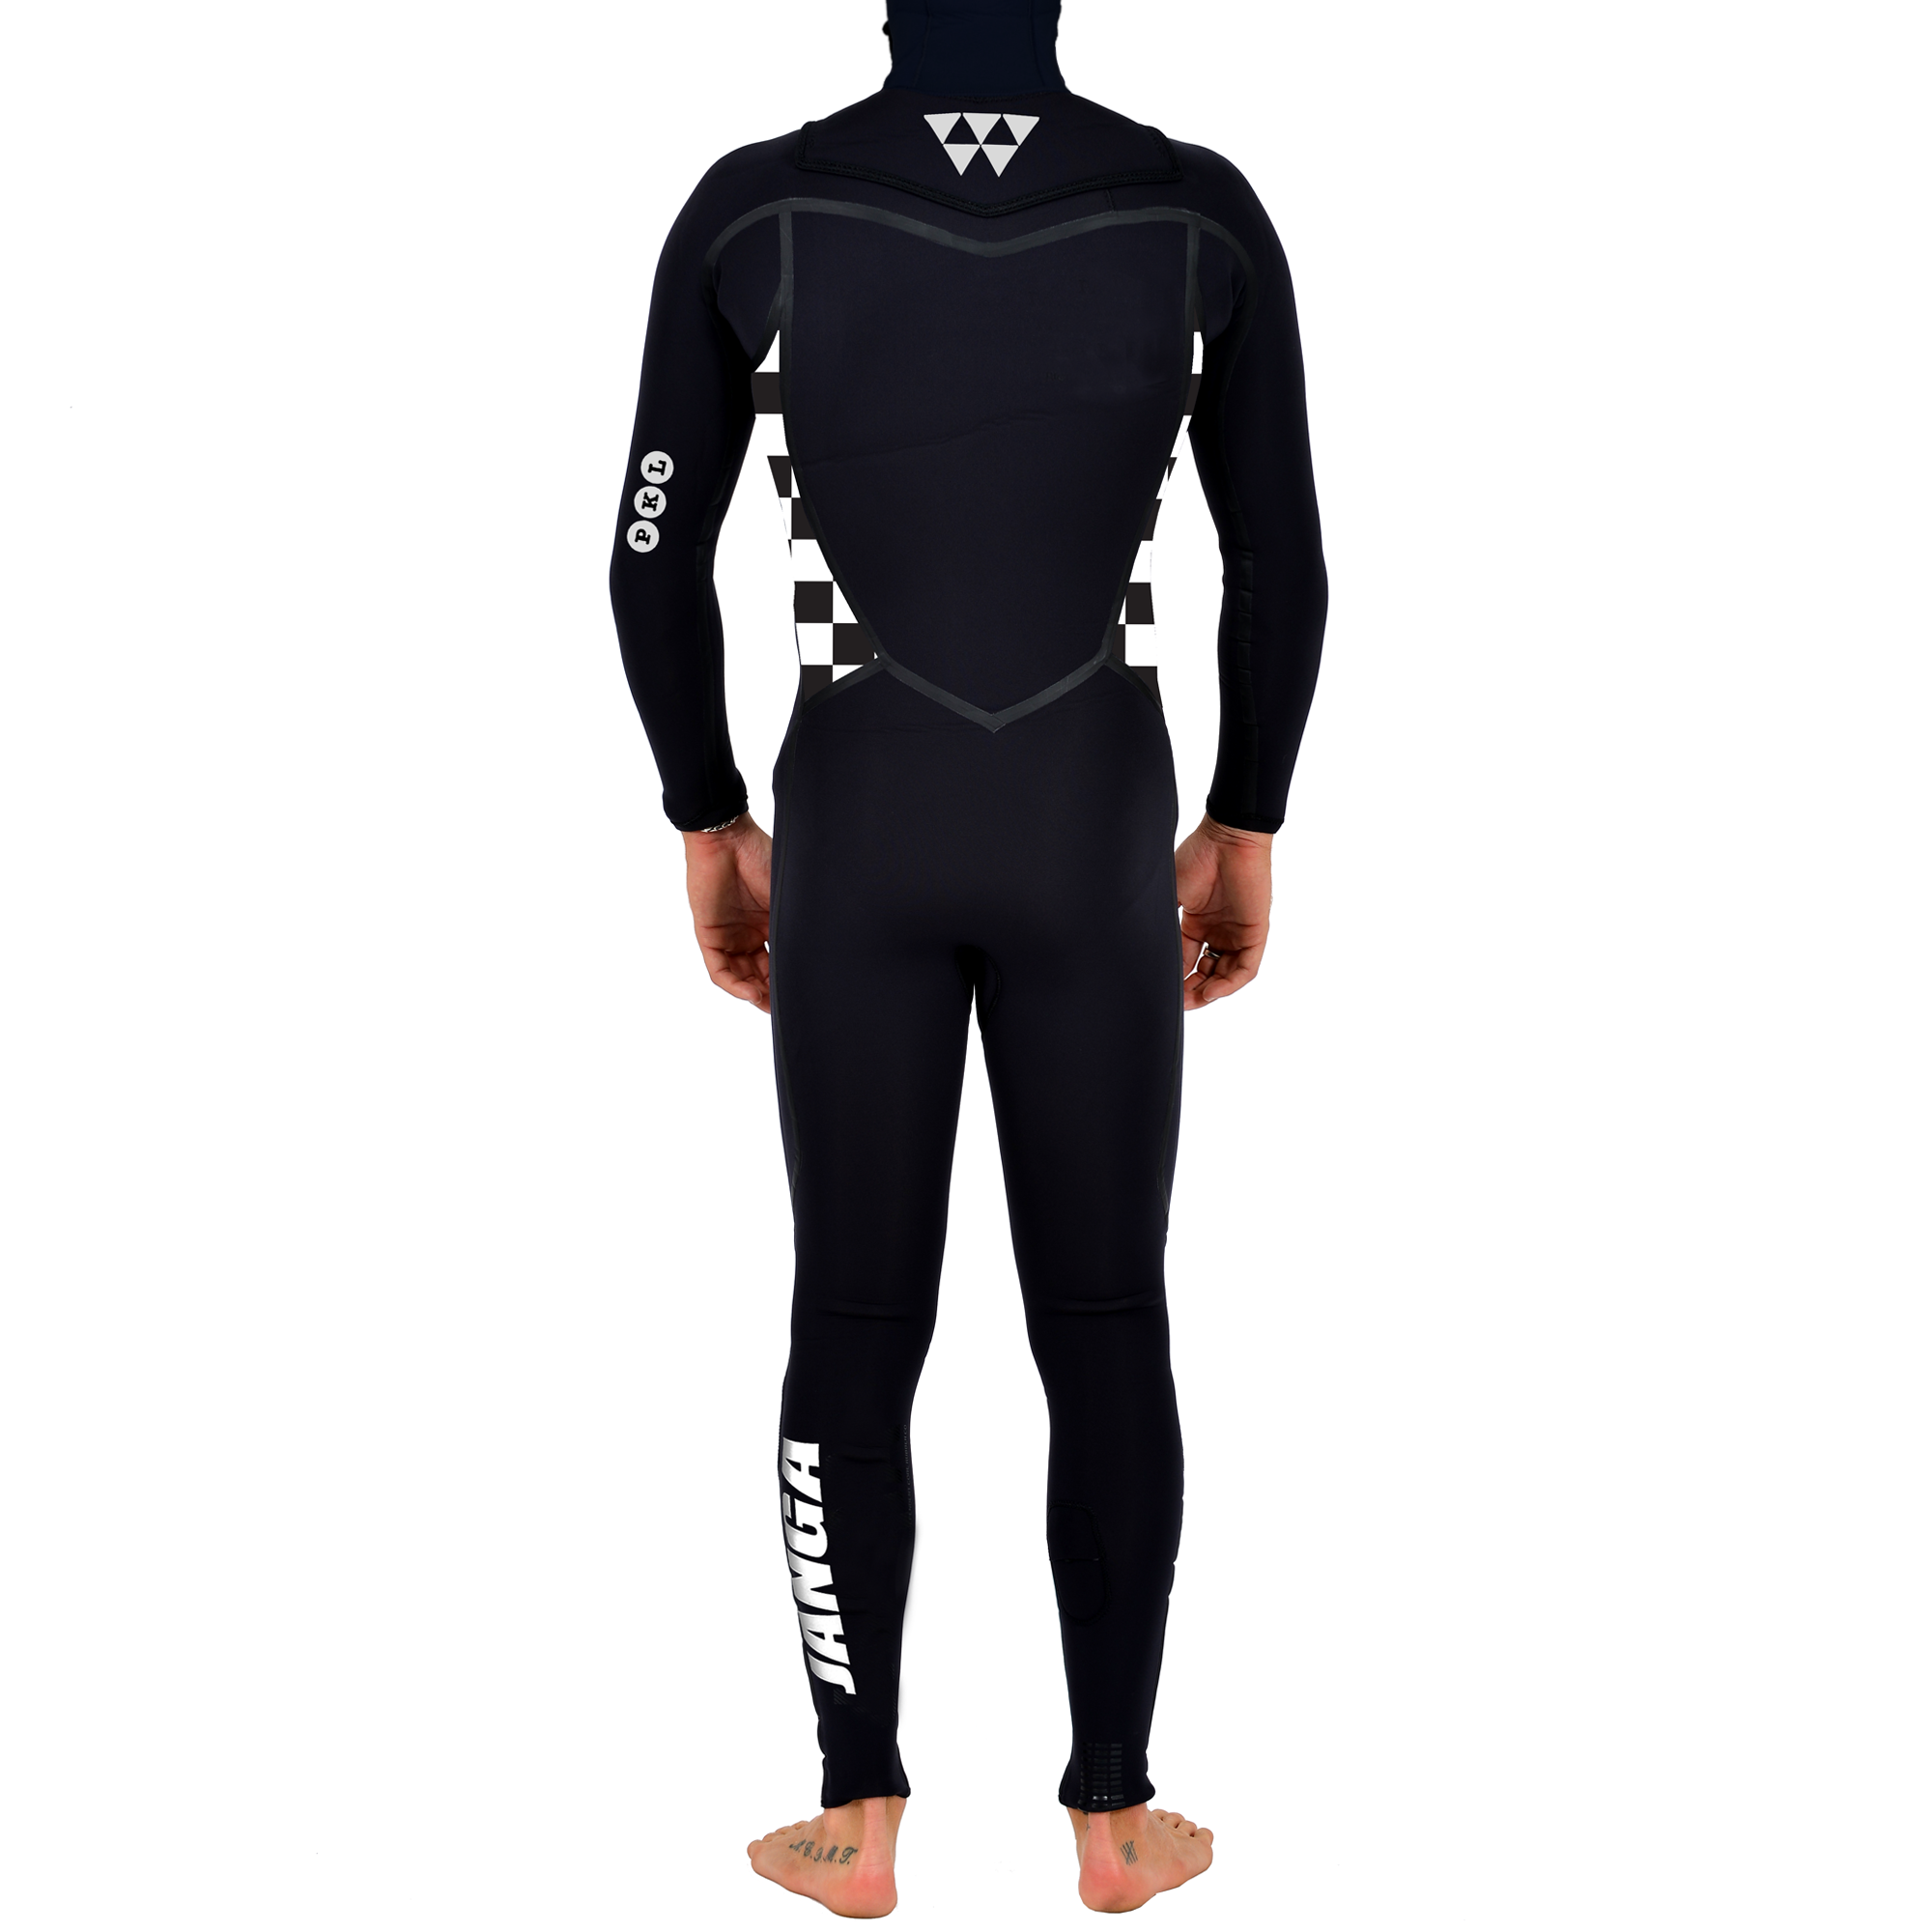 PAINKILLER CHECKERS HOODED YAMAMOTO WETSUIT